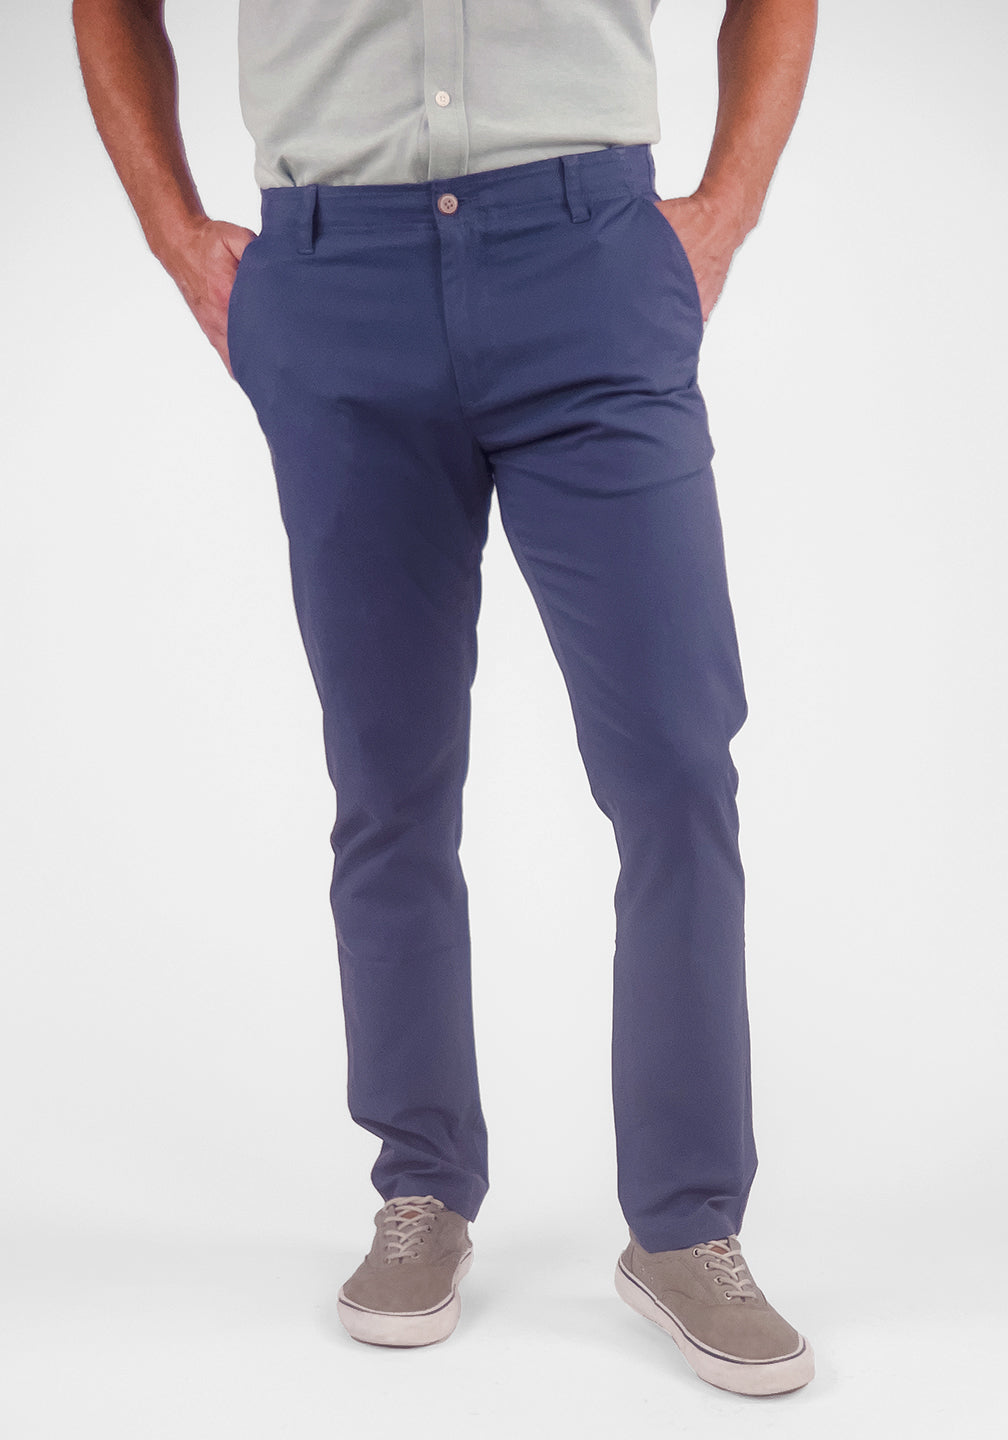 Airotec Performance Slim Fit Chino Pants - Spring Colors